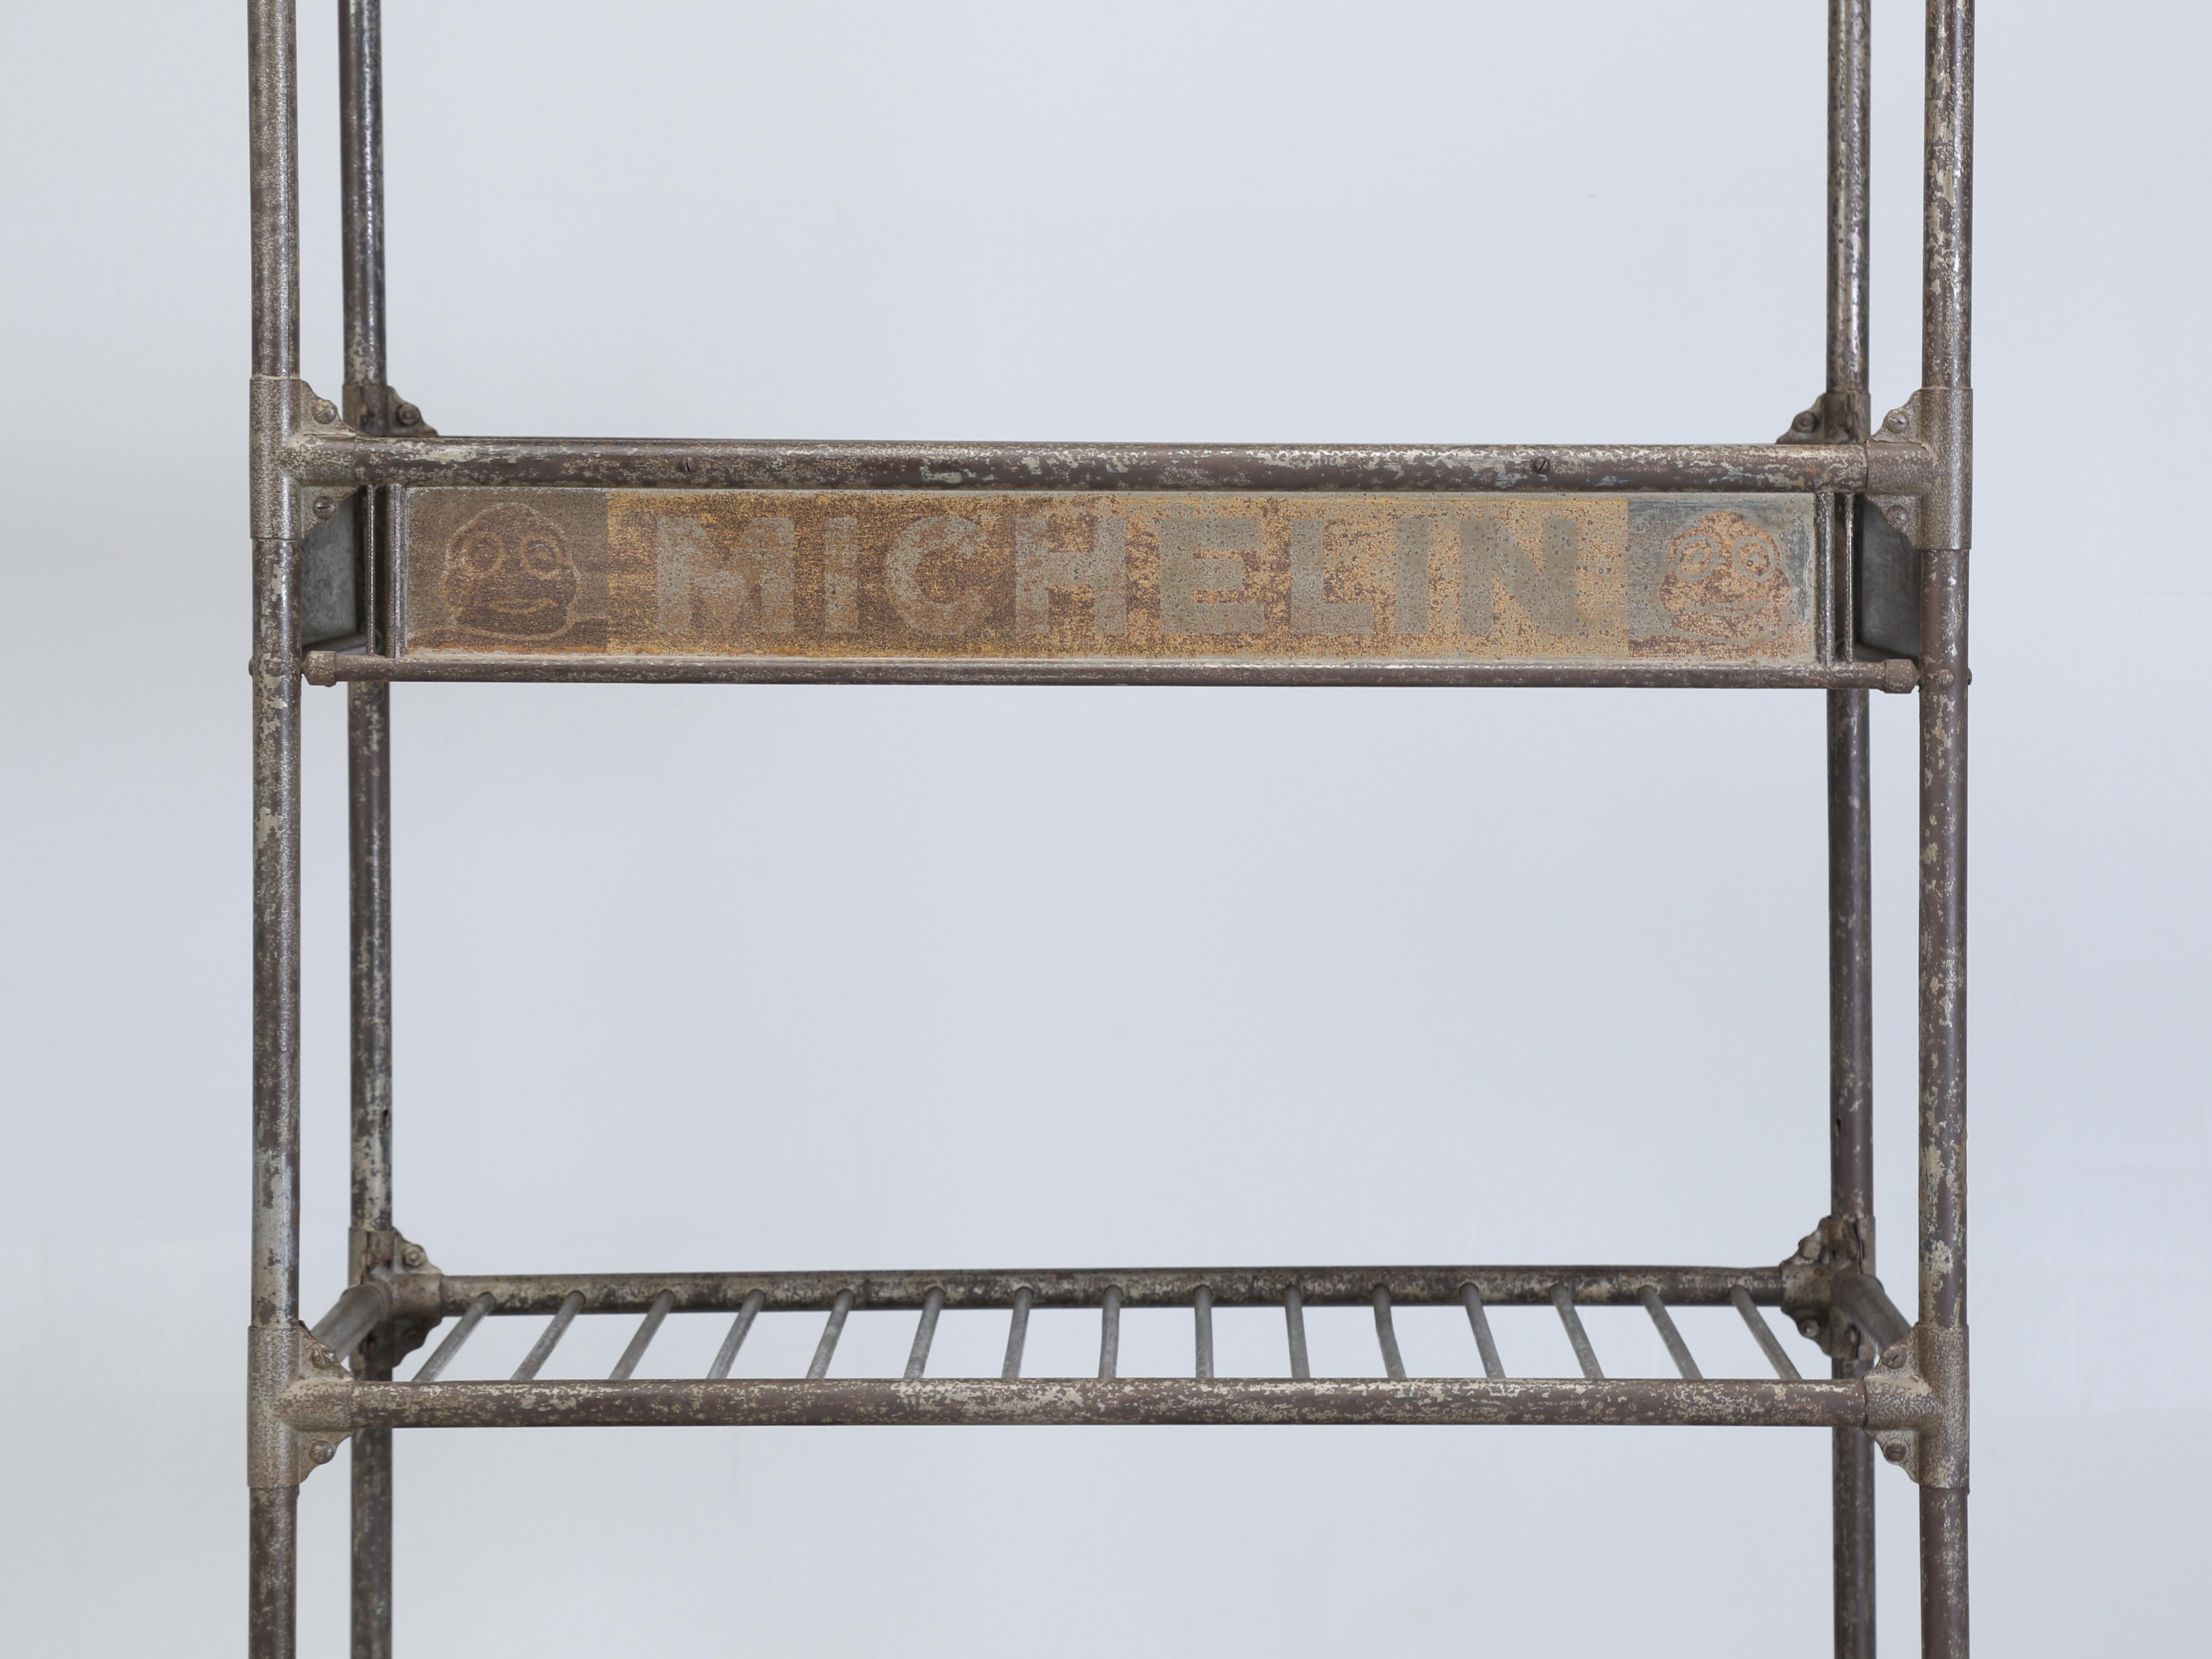 Michelin Antique French Industrial Steel Shelf Unit Made in France c1900-1920 For Sale 1